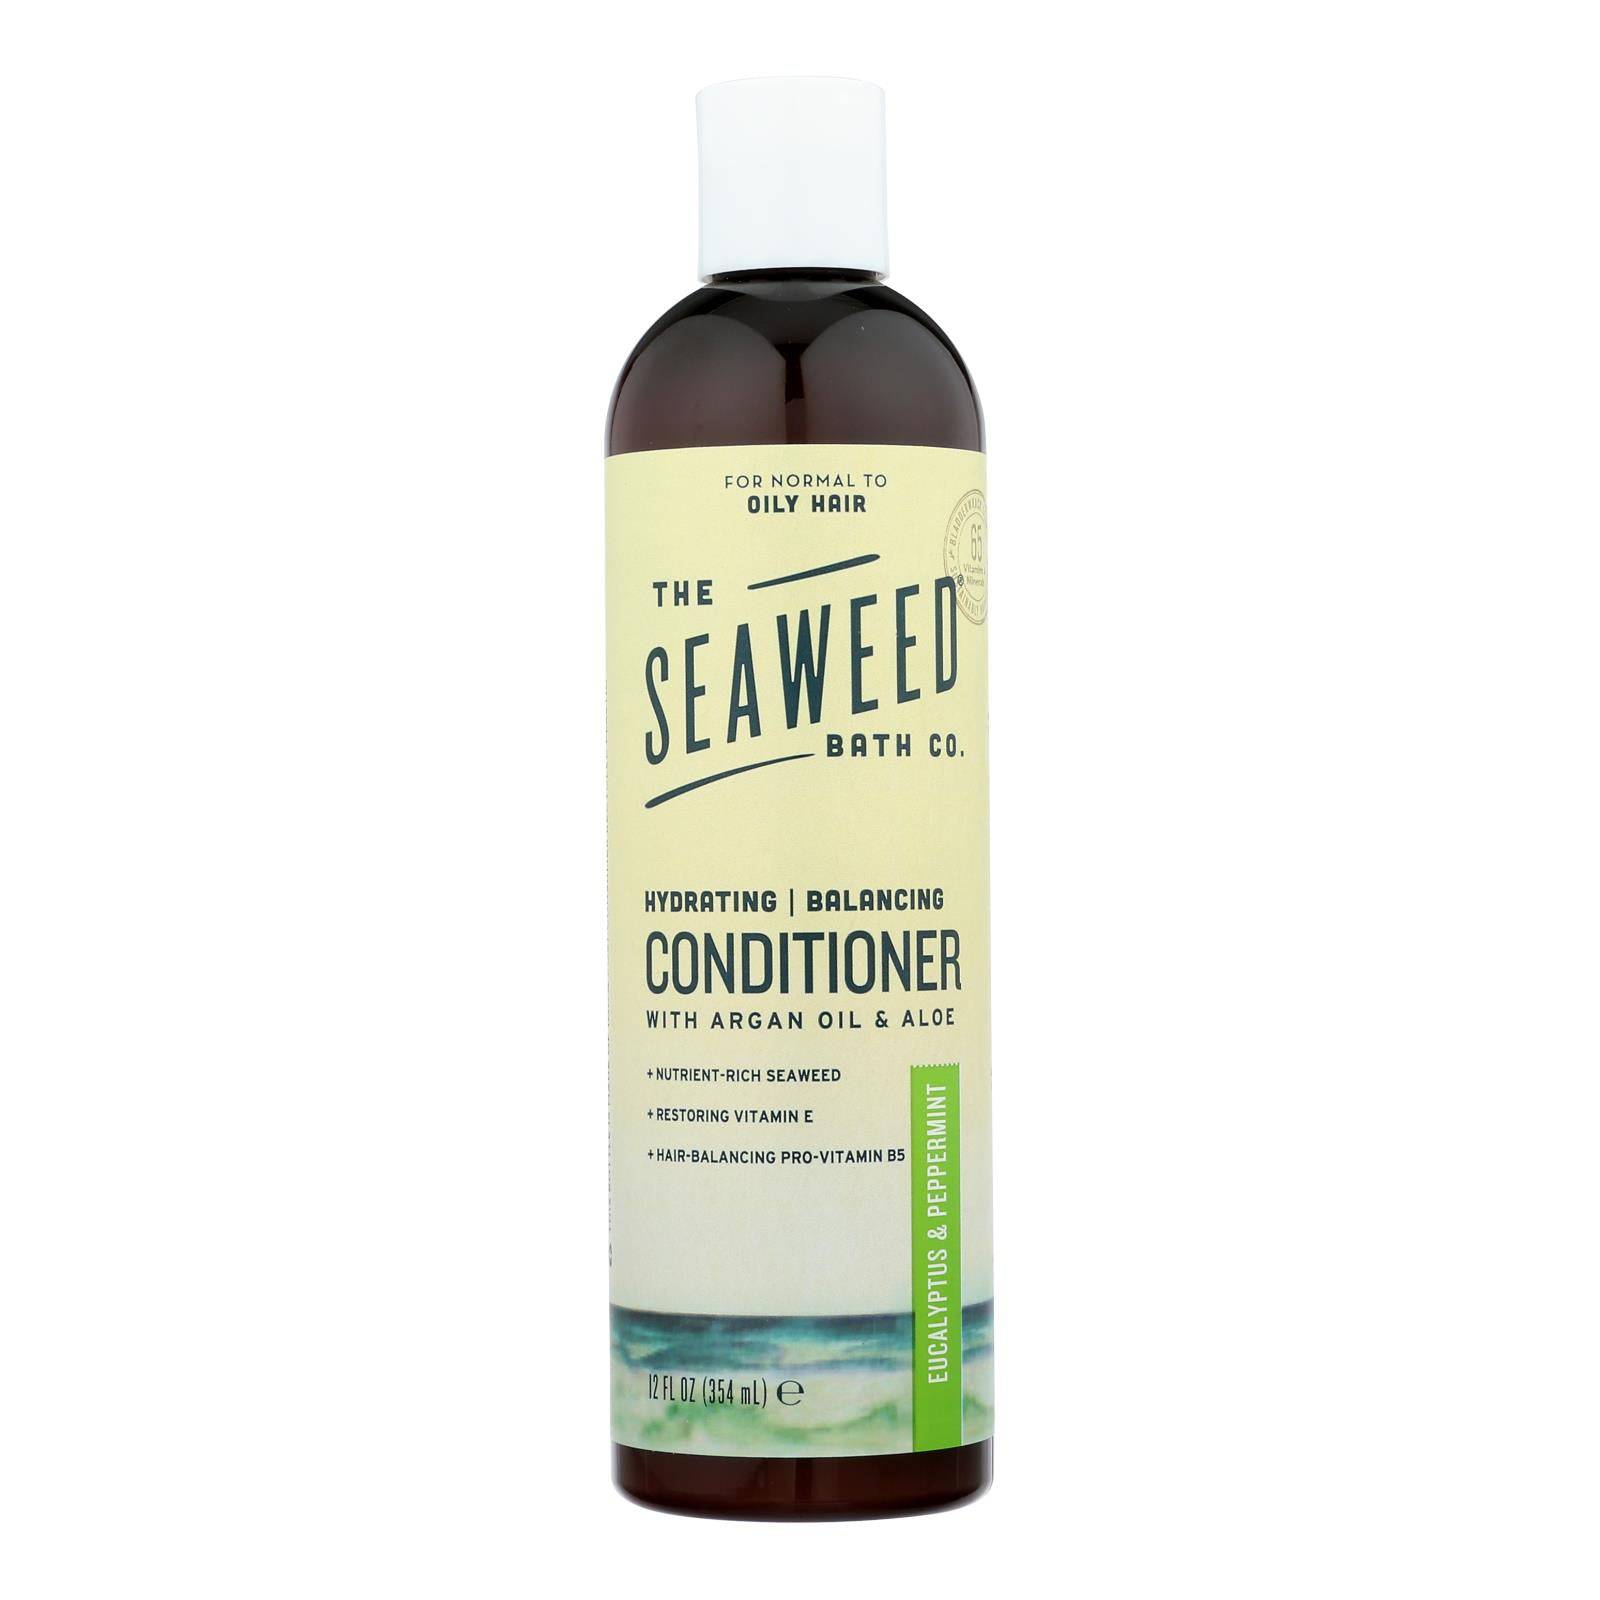 Buy The Seaweed Bath Co Conditioner - Balancing - Eucalyptus - Pepper - 12 Fl Oz  at OnlyNaturals.us